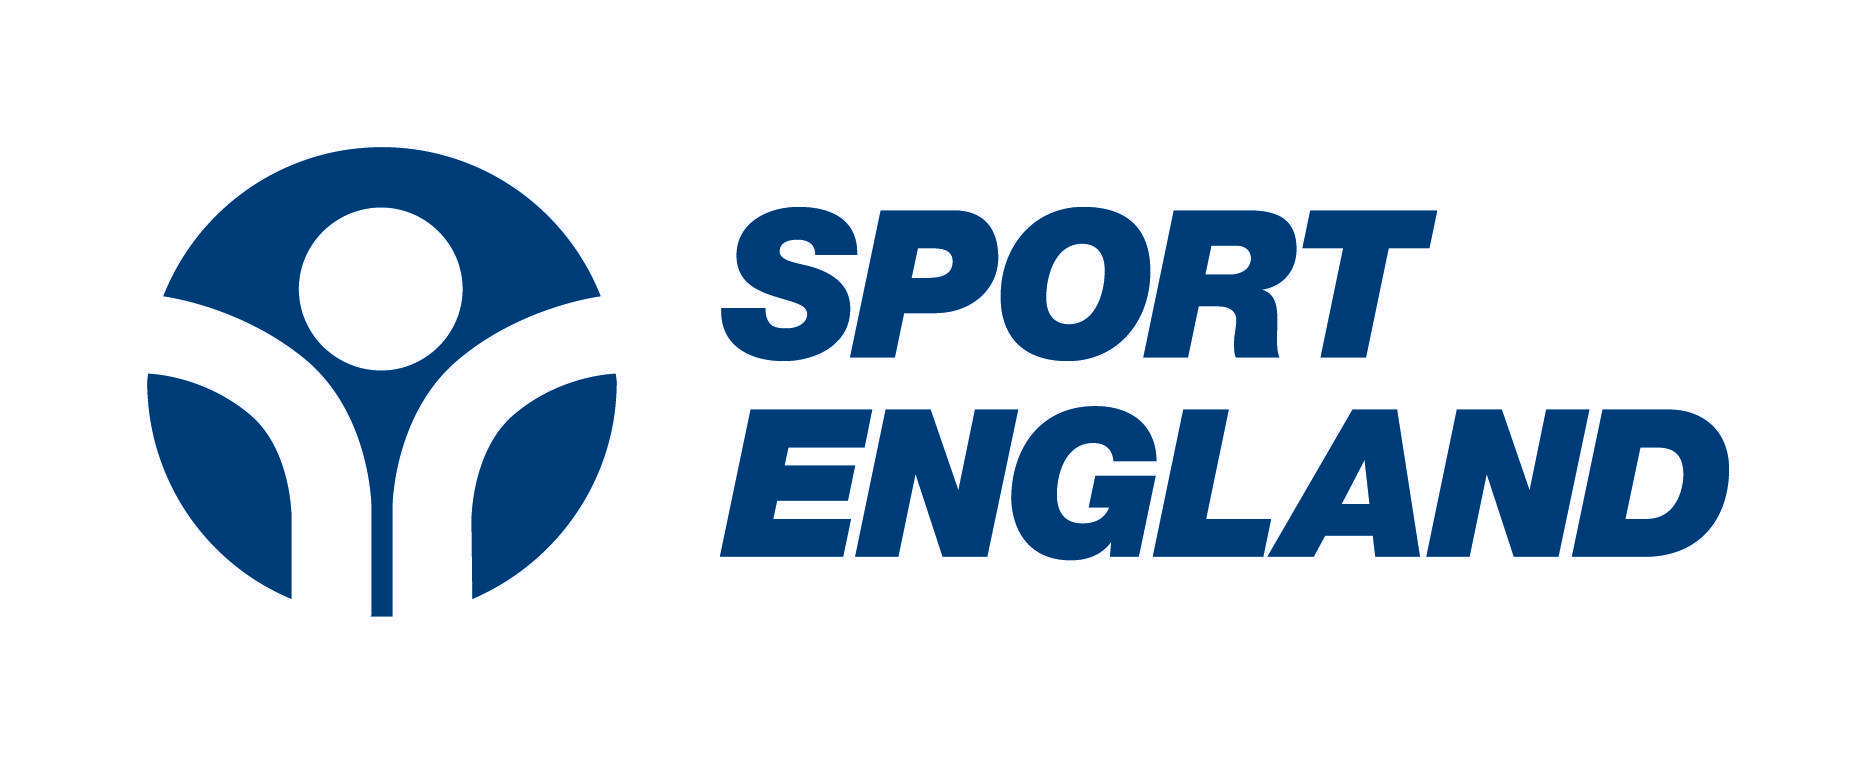 Country Sports Logo - Logos - National Lottery Digital Toolkit for Sport England